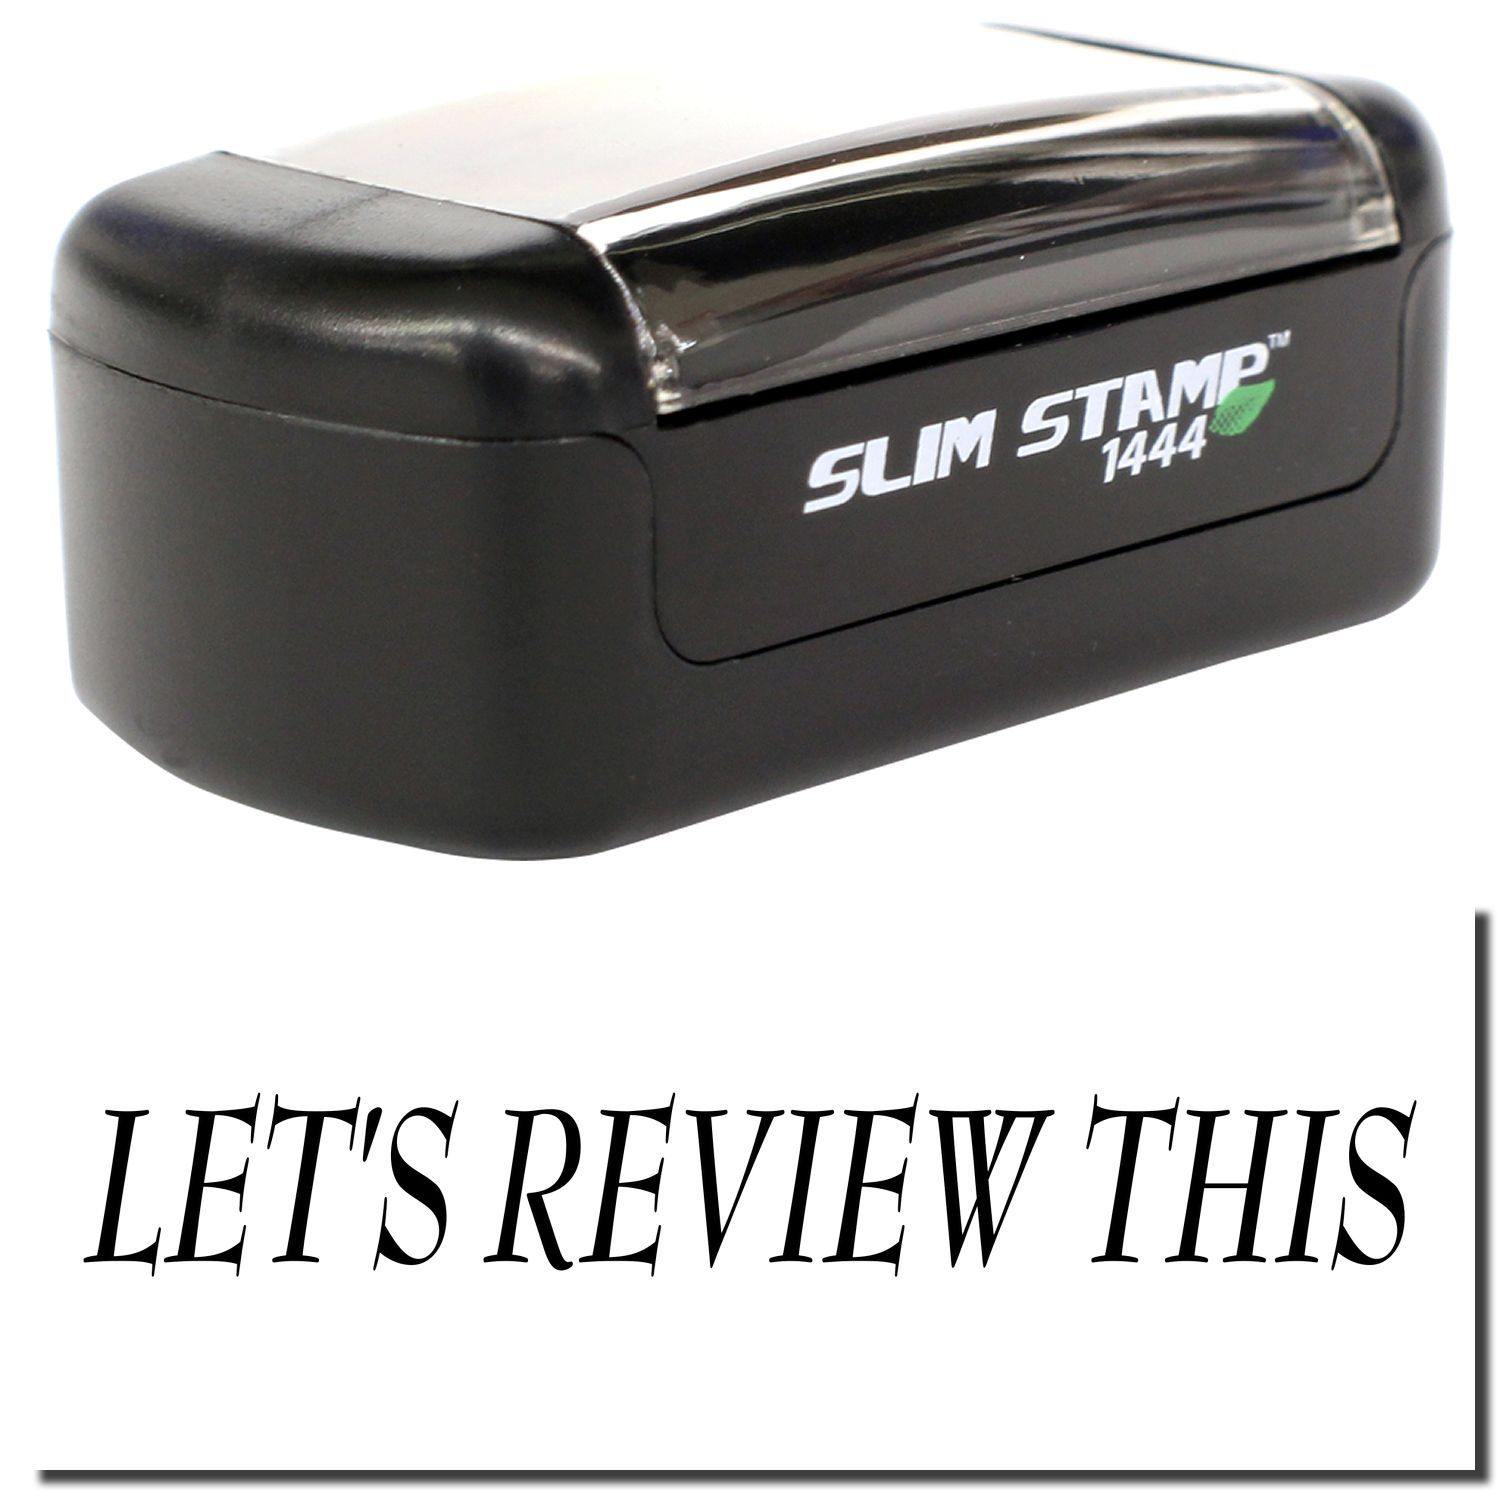 A stock office pre-inked stamp with a stamped image showing how the text "LET'S REVIEW THIS" is displayed after stamping.